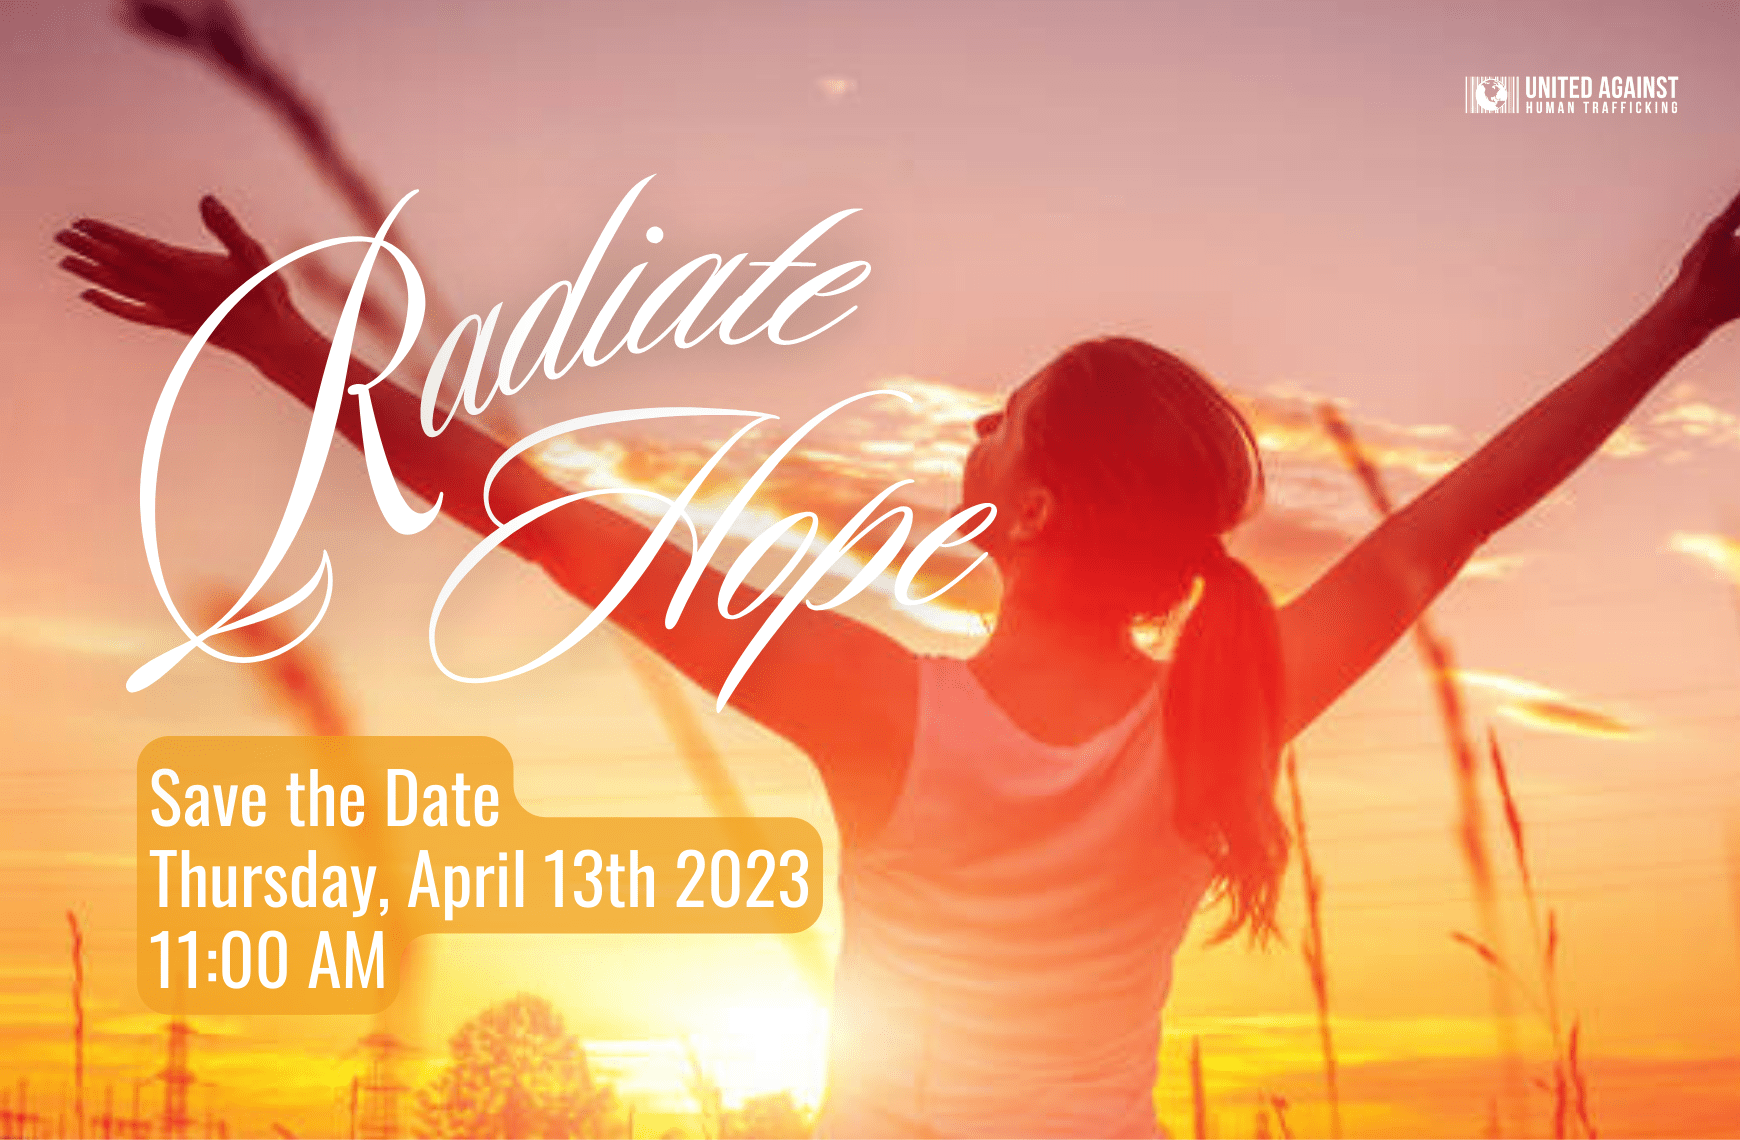 A hopeful photo of a red and gold sunset. A woman reaches her arms out wide toward the sky. Over the image, text reads "Radiate Hope. Save the Date Thursday, April 13th